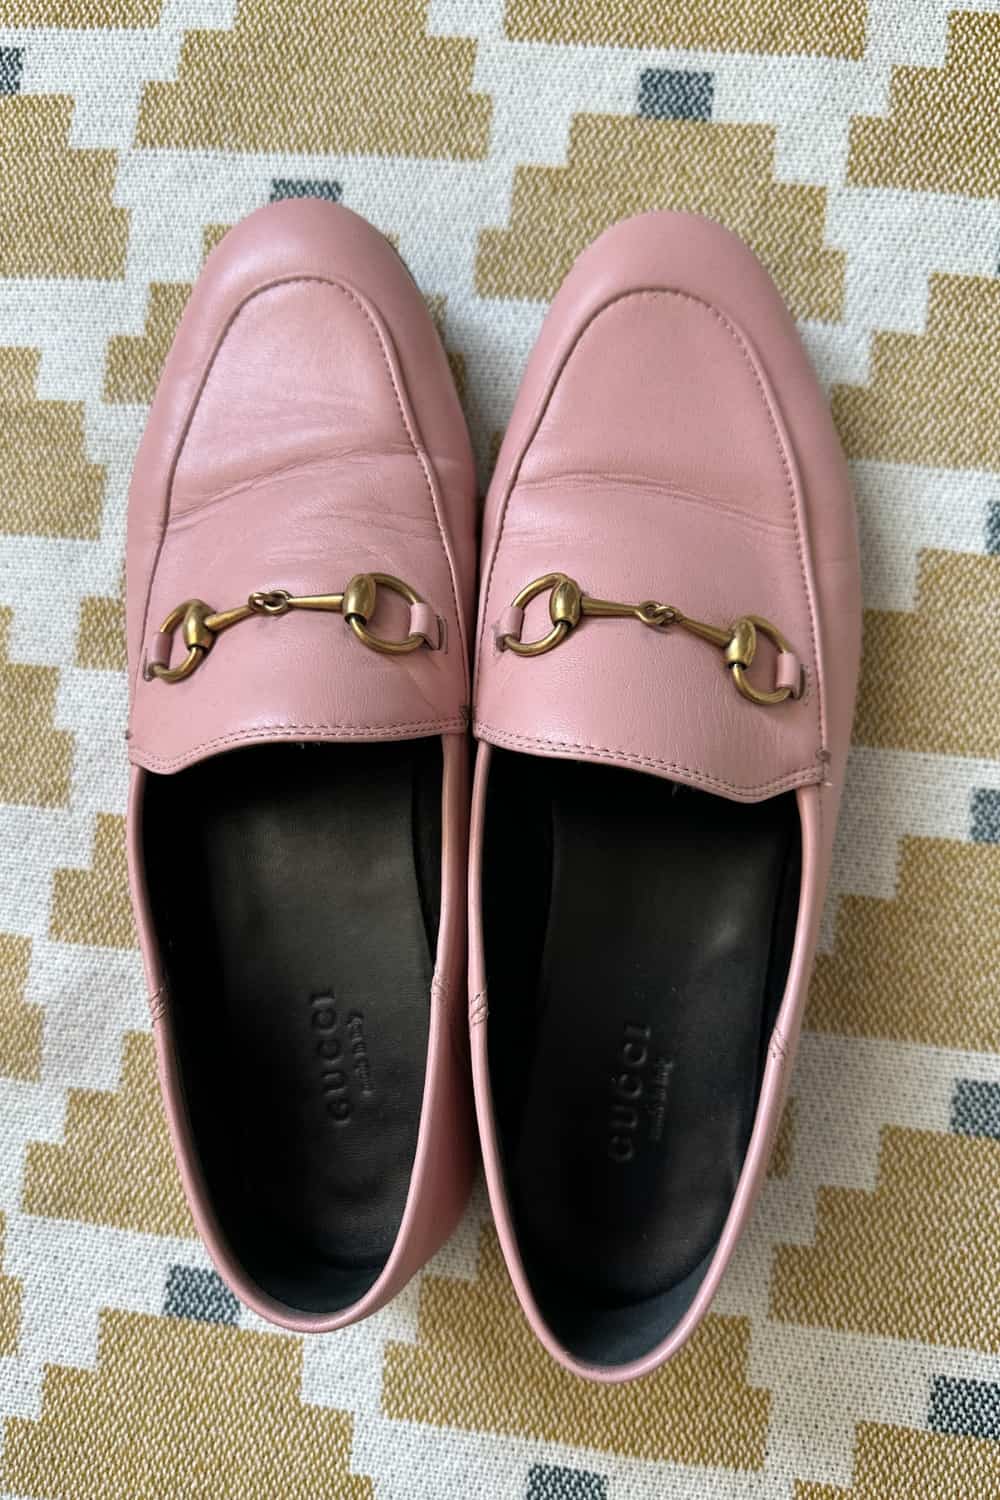 Coach Haley Loafer Honest Review: Should You Buy It